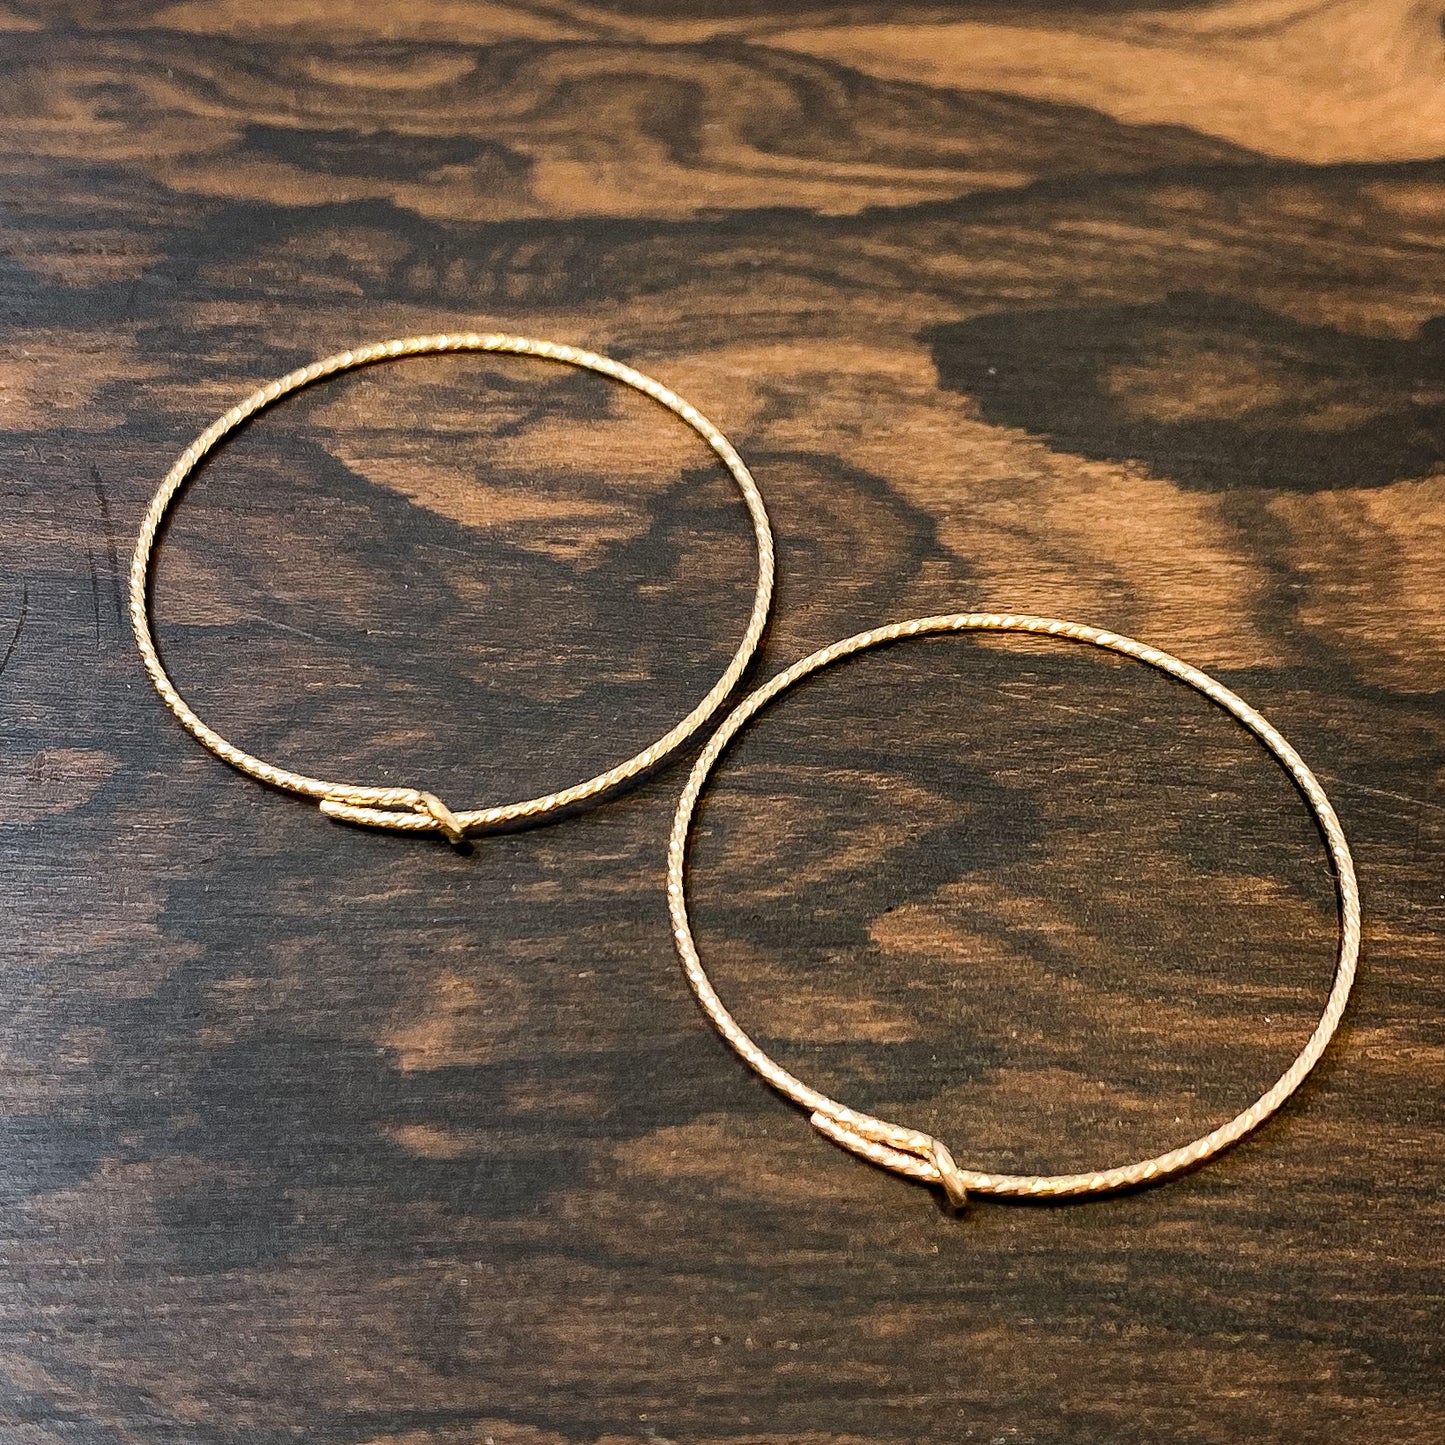 28mm Sparkle Hoop Earring (3 Metal Options Available) - 1 pair